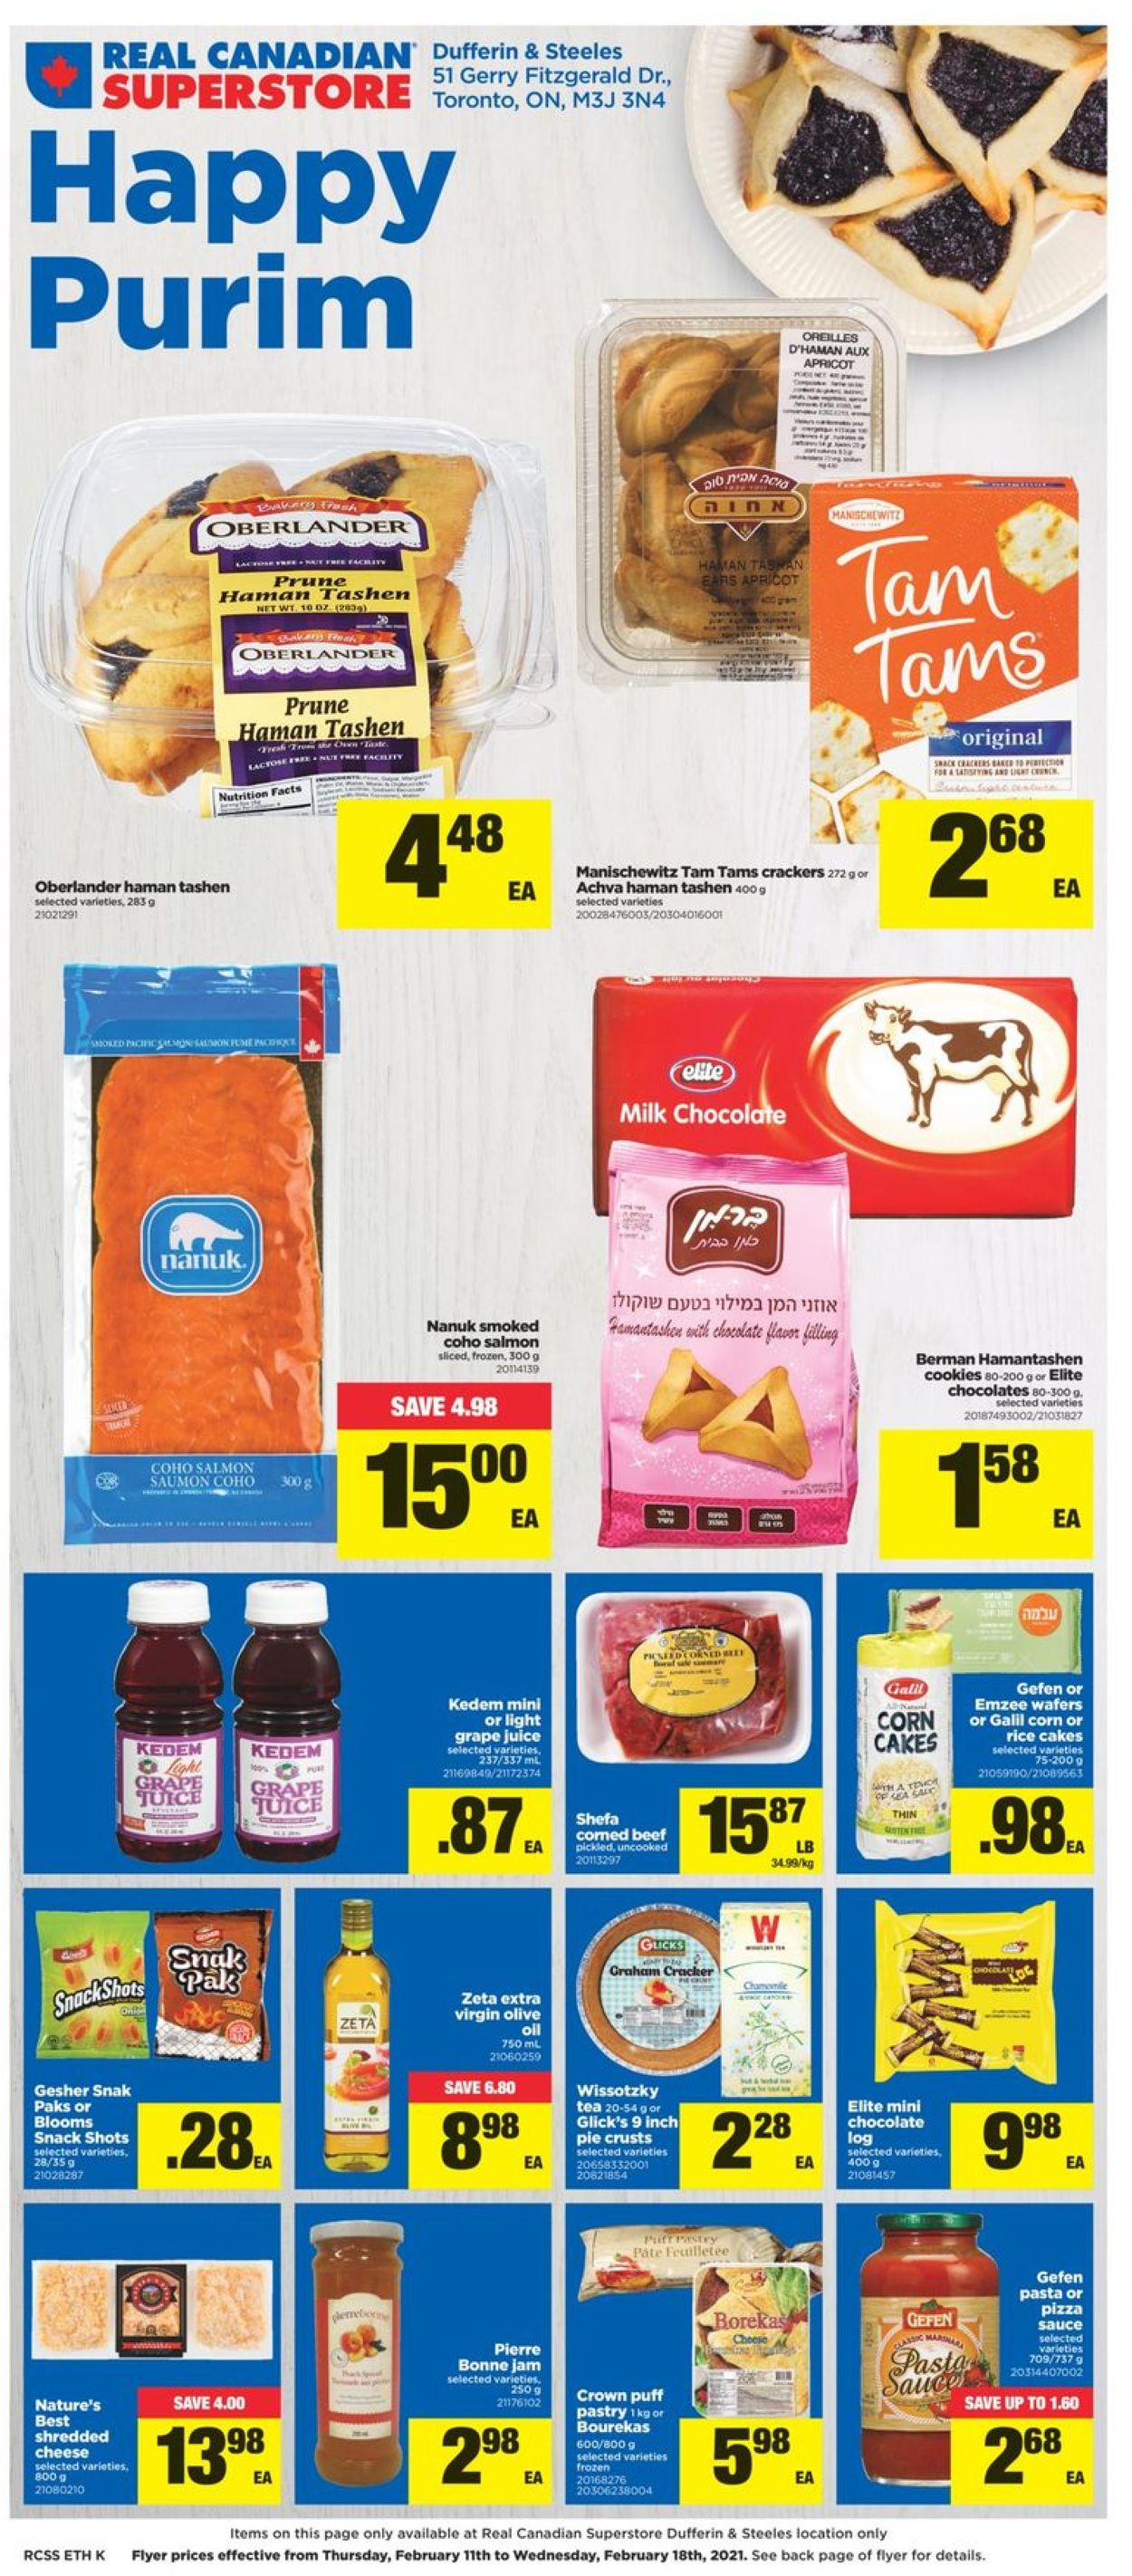 Real Canadian Superstore - Happy Lunar New Year 2021 Flyer - 02/11-02/17/2021 (Page 2)